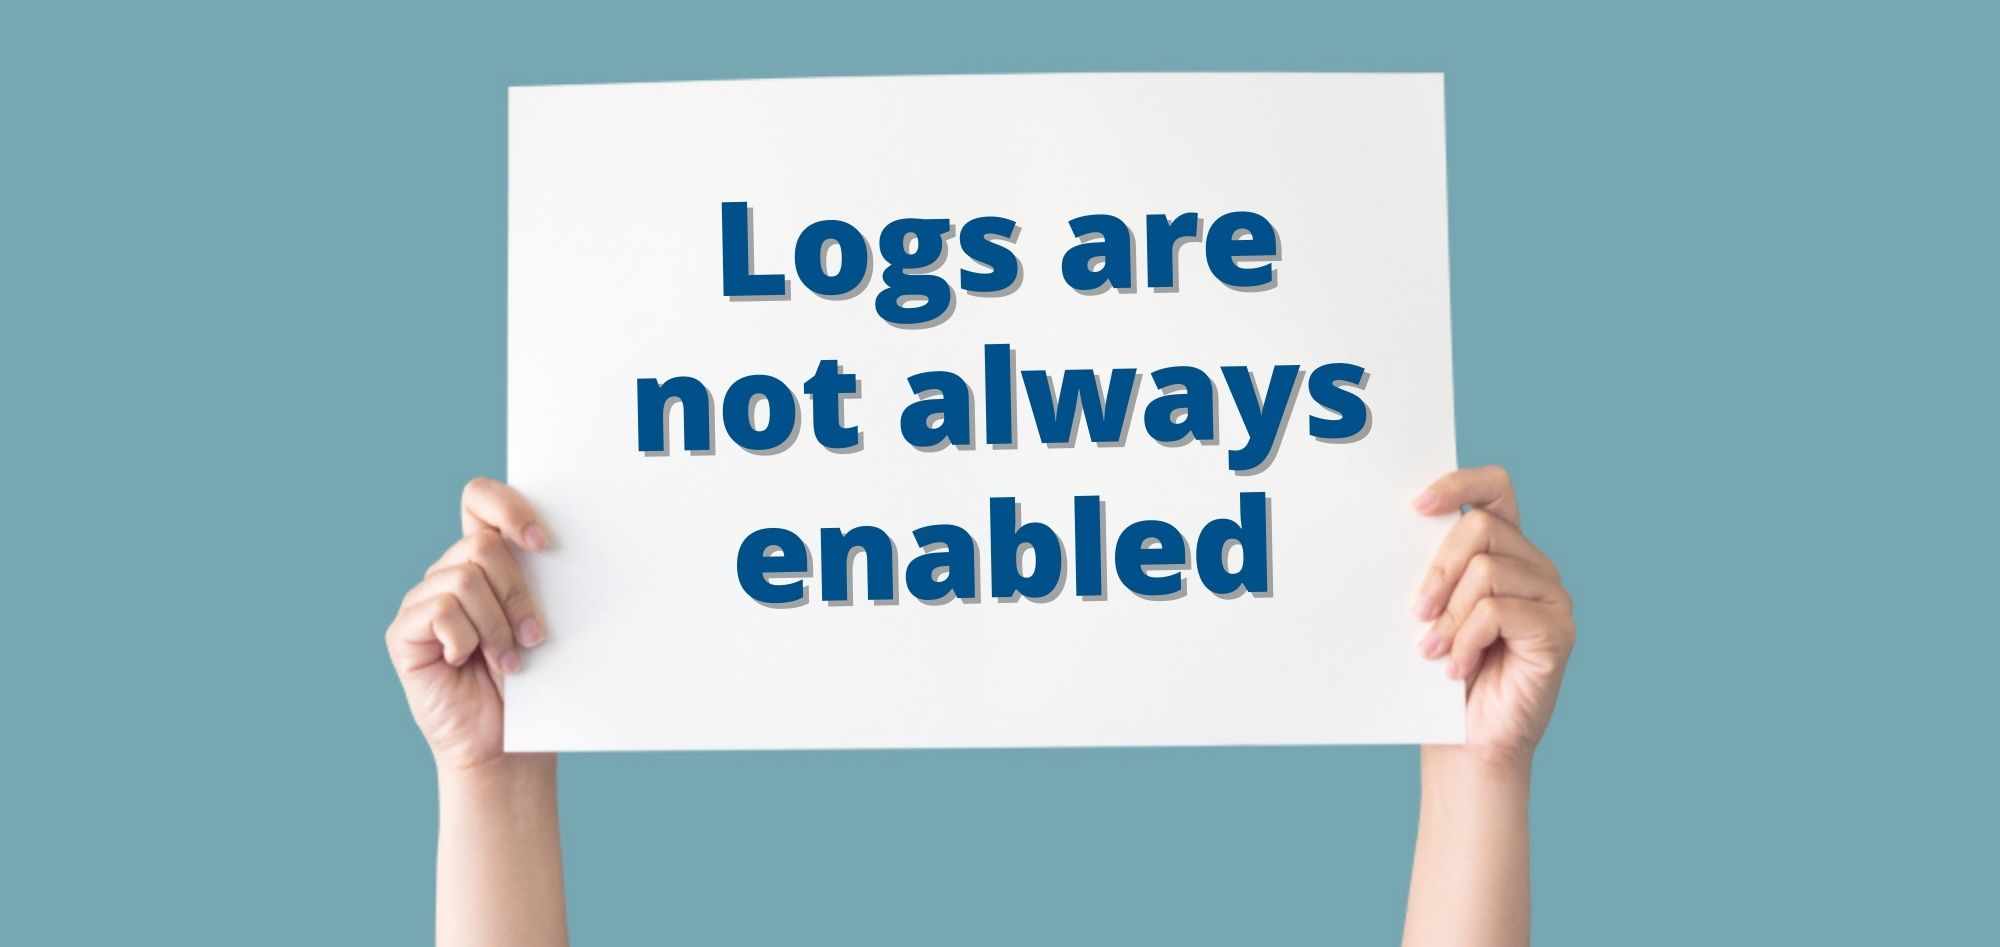 Logs are not always enabled